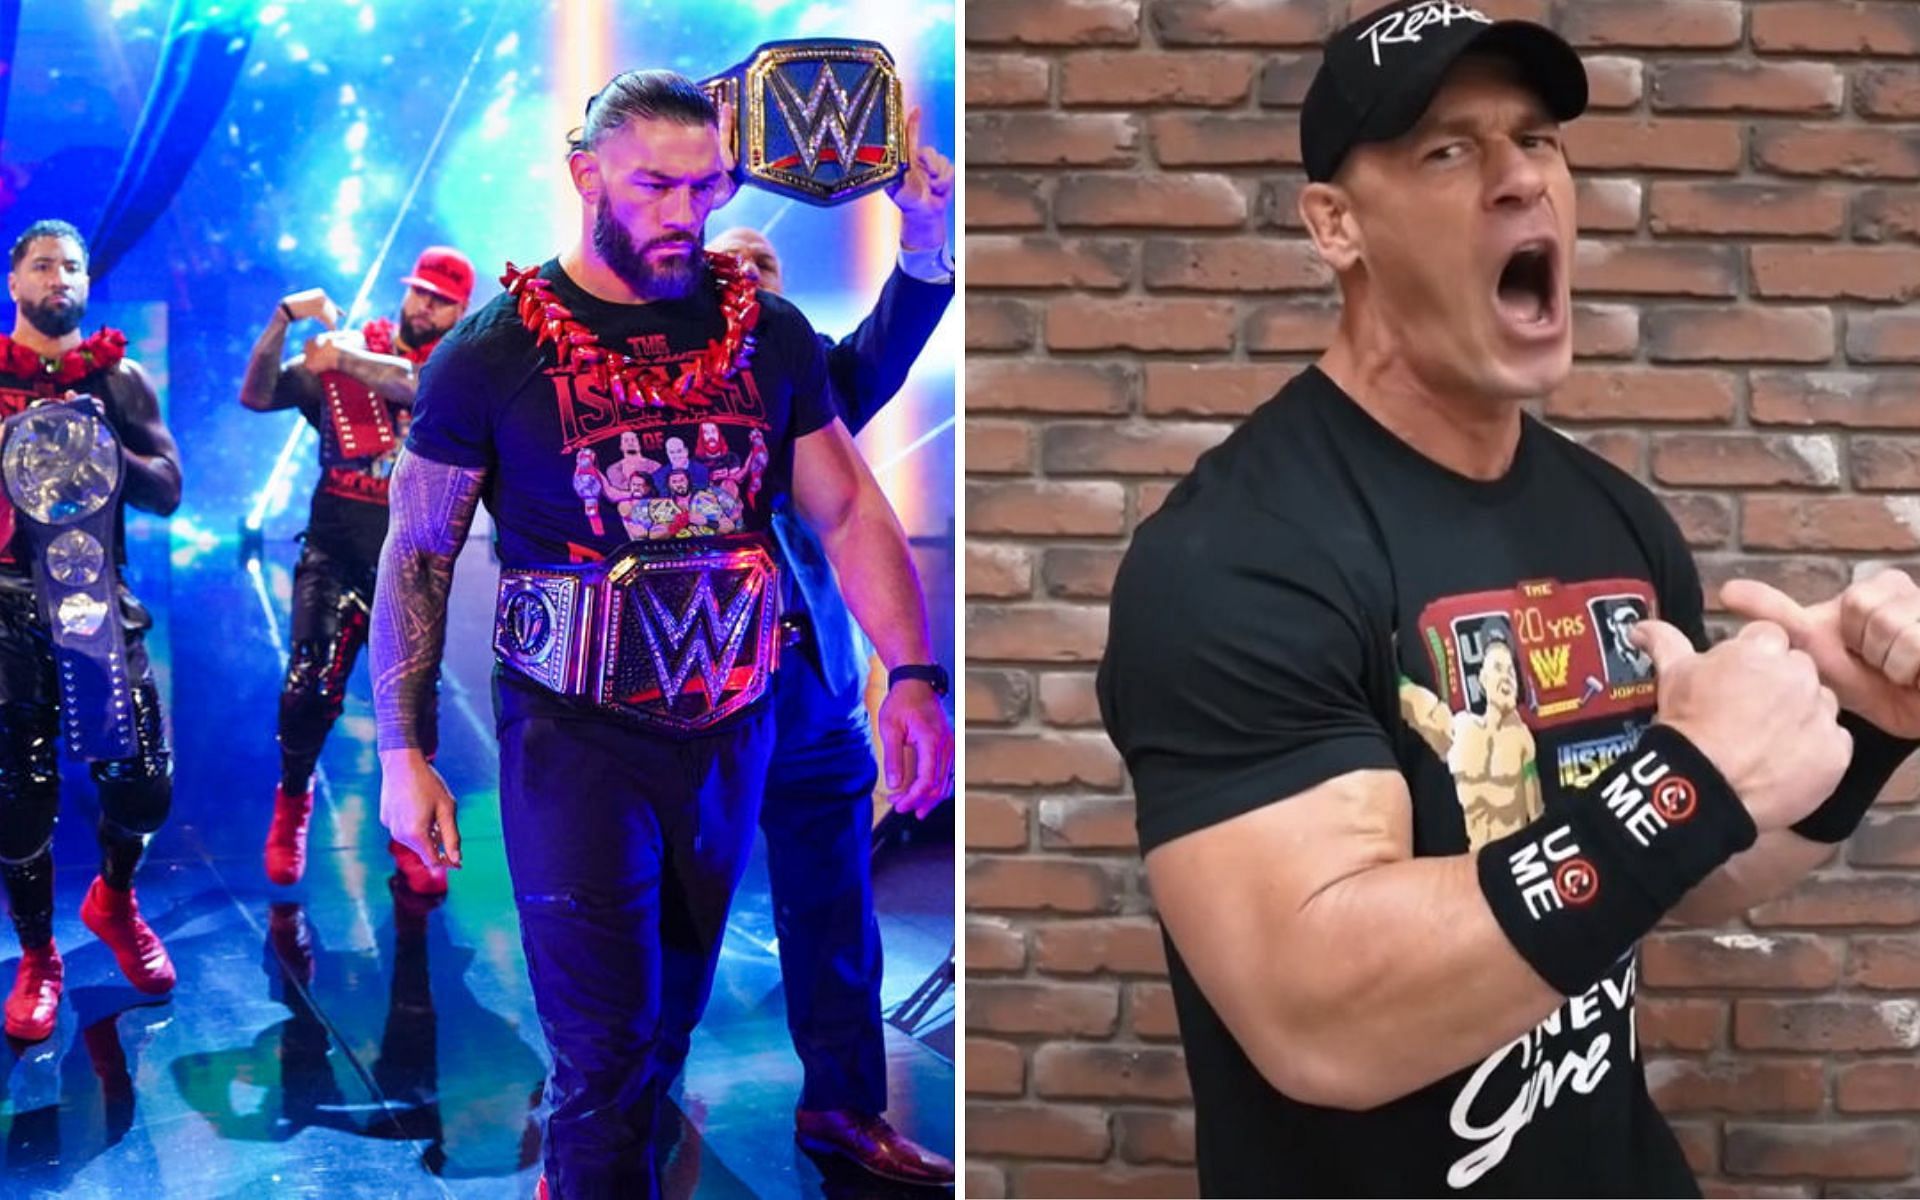 The Bloodline family member compared himself to John Cena